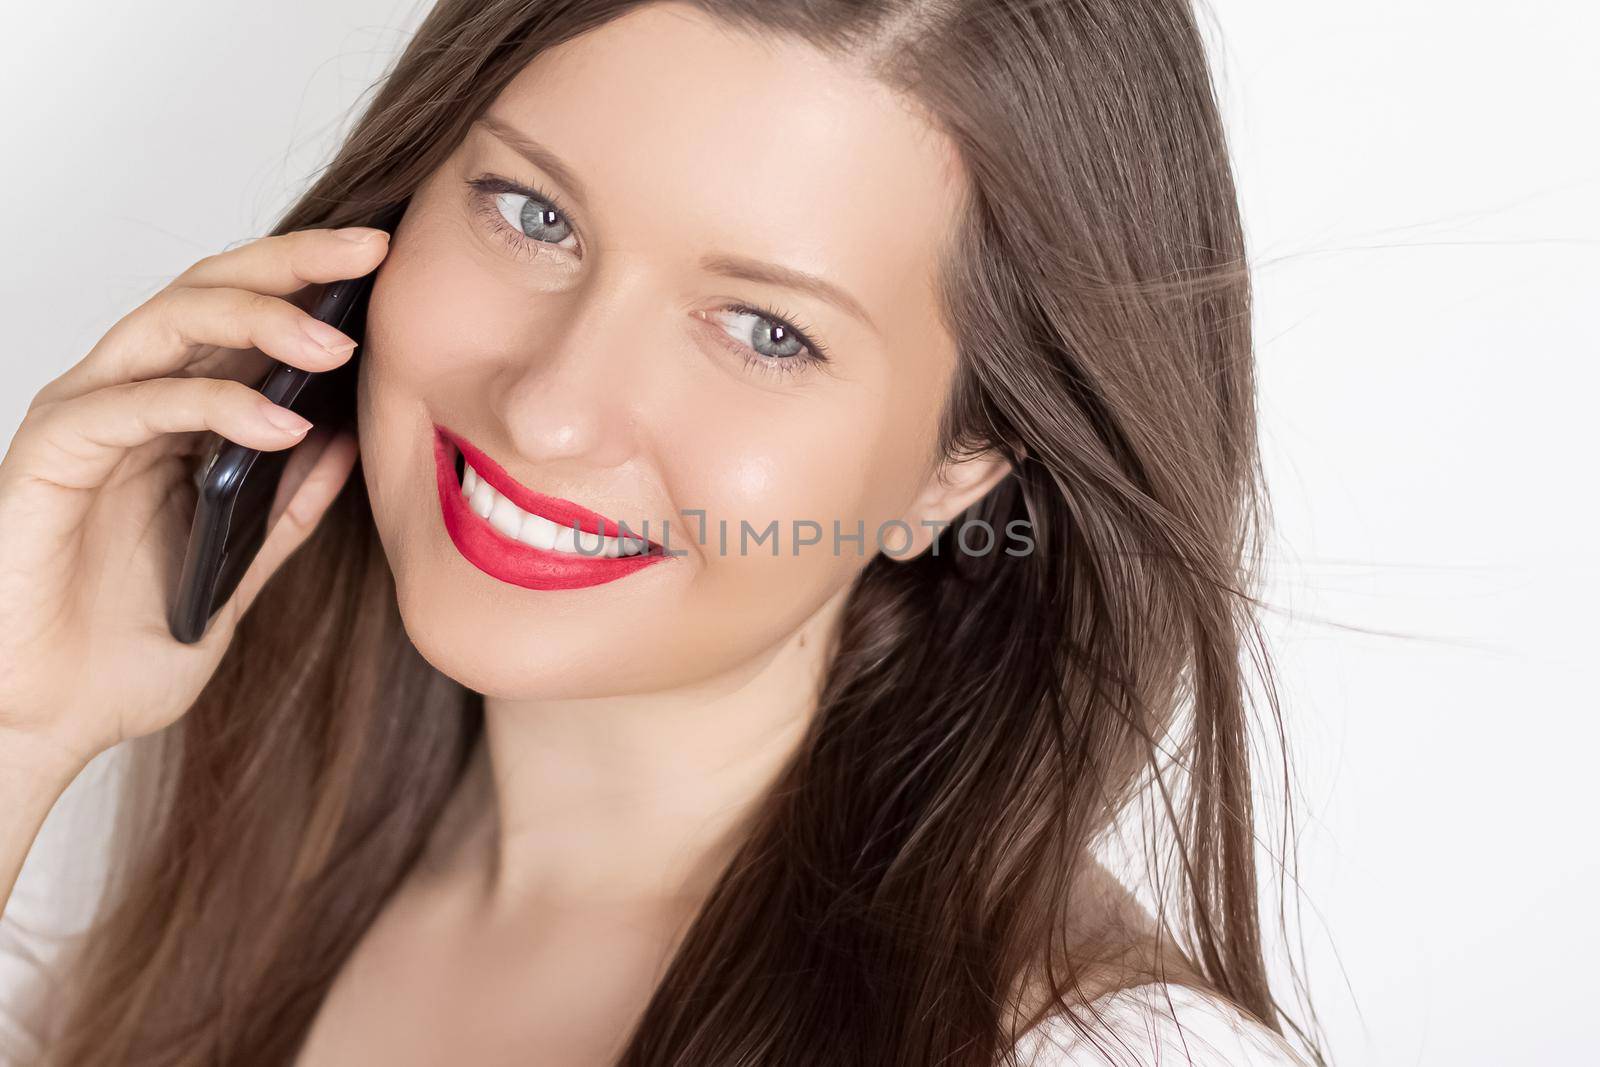 Happy smiling woman calling on smartphone, portrait on white background. People, technology and communication concept by Anneleven